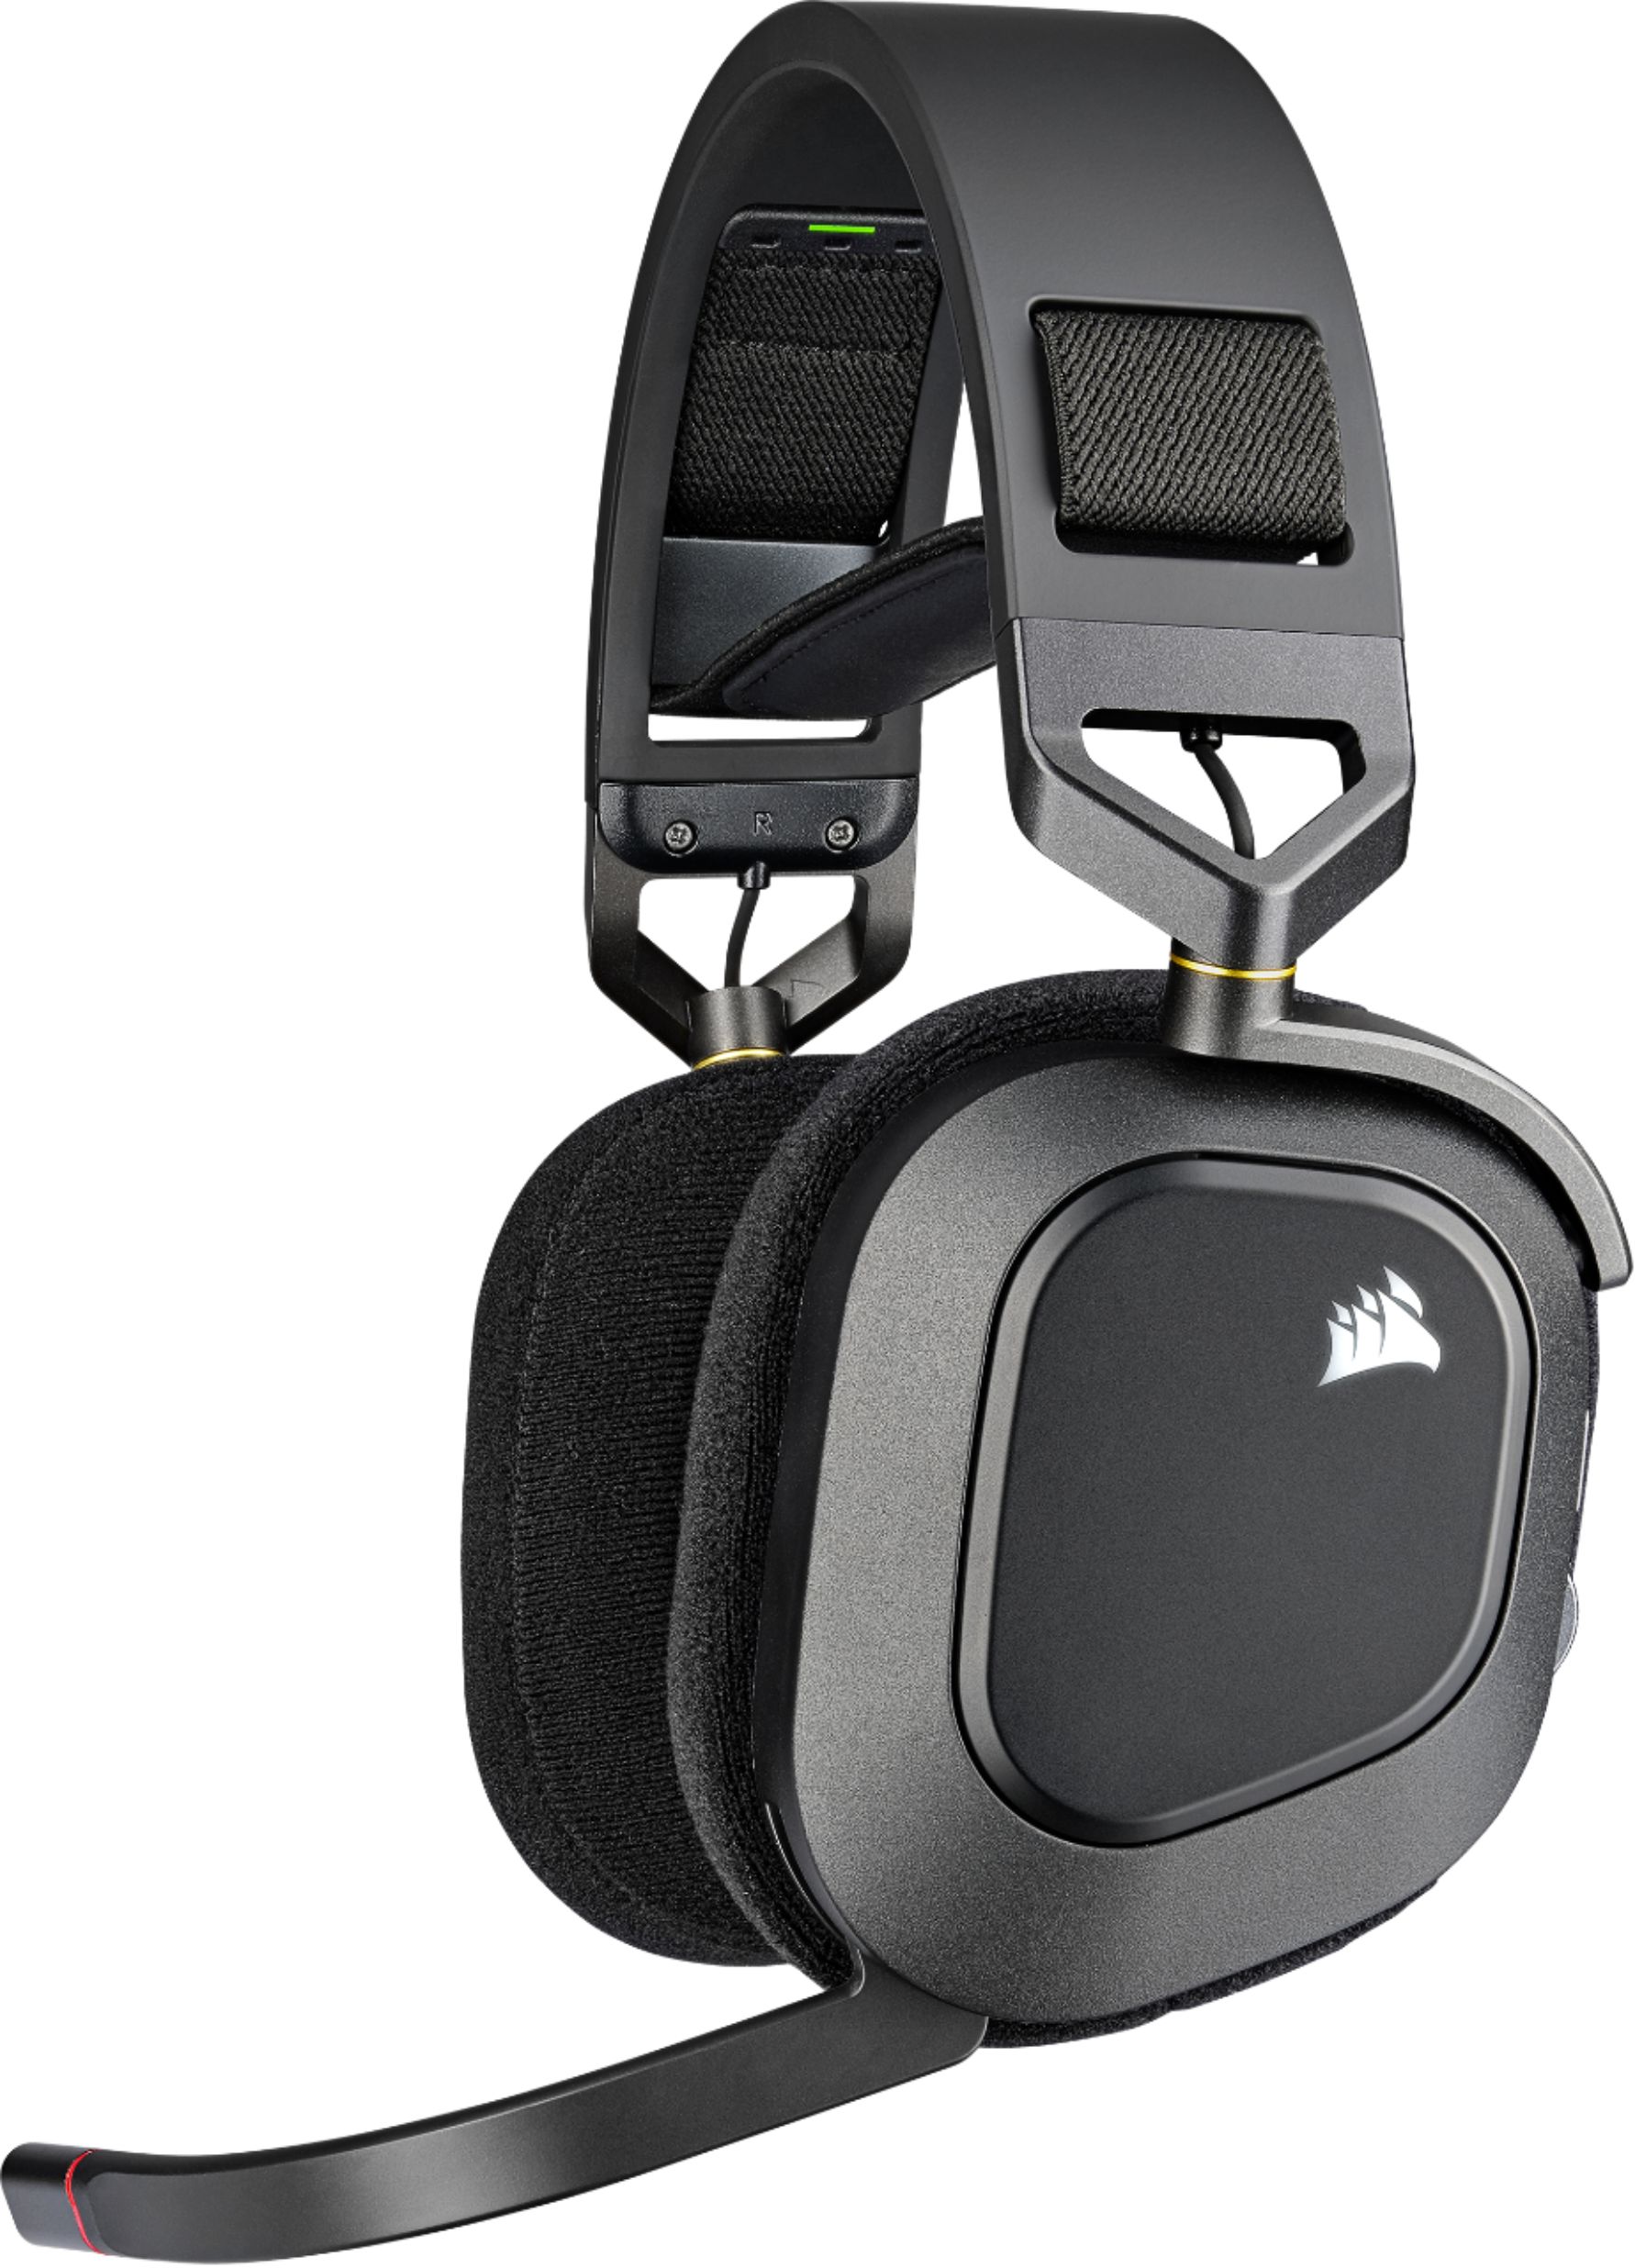 Eerder Gewend aan Menselijk ras CORSAIR HS80 RGB WIRELESS Dolby Atmos Gaming Headset for PC, Mac, PS5|PS4  with Broadcast-Grade Omni-Directional Microphone Carbon CA-9011235-NA - Best  Buy